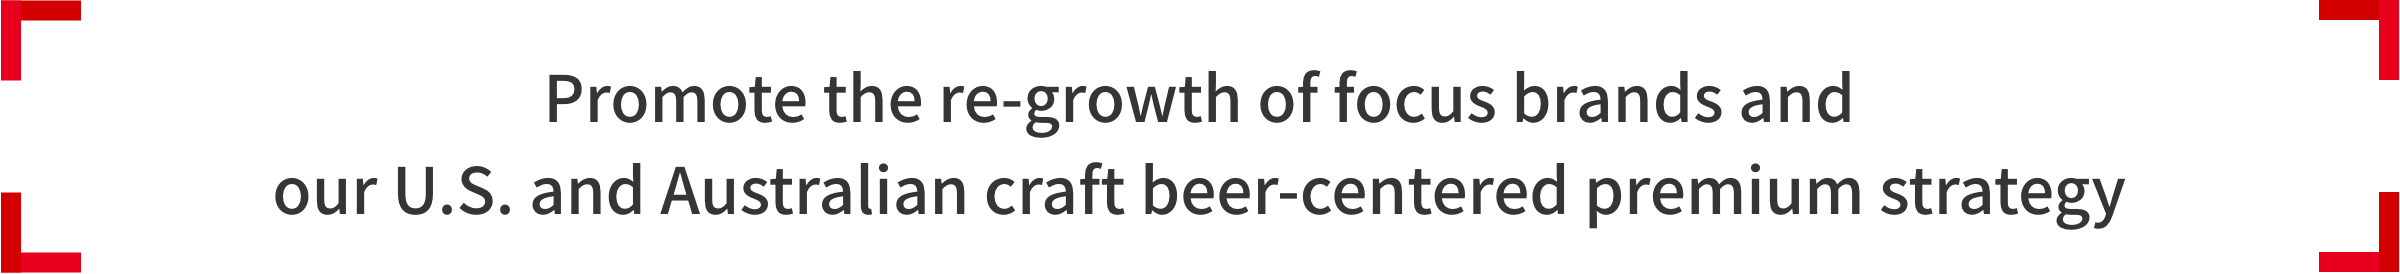 Promote the re-growth of focus brands and our U.S. and Australian craft beer-centered premium strategy